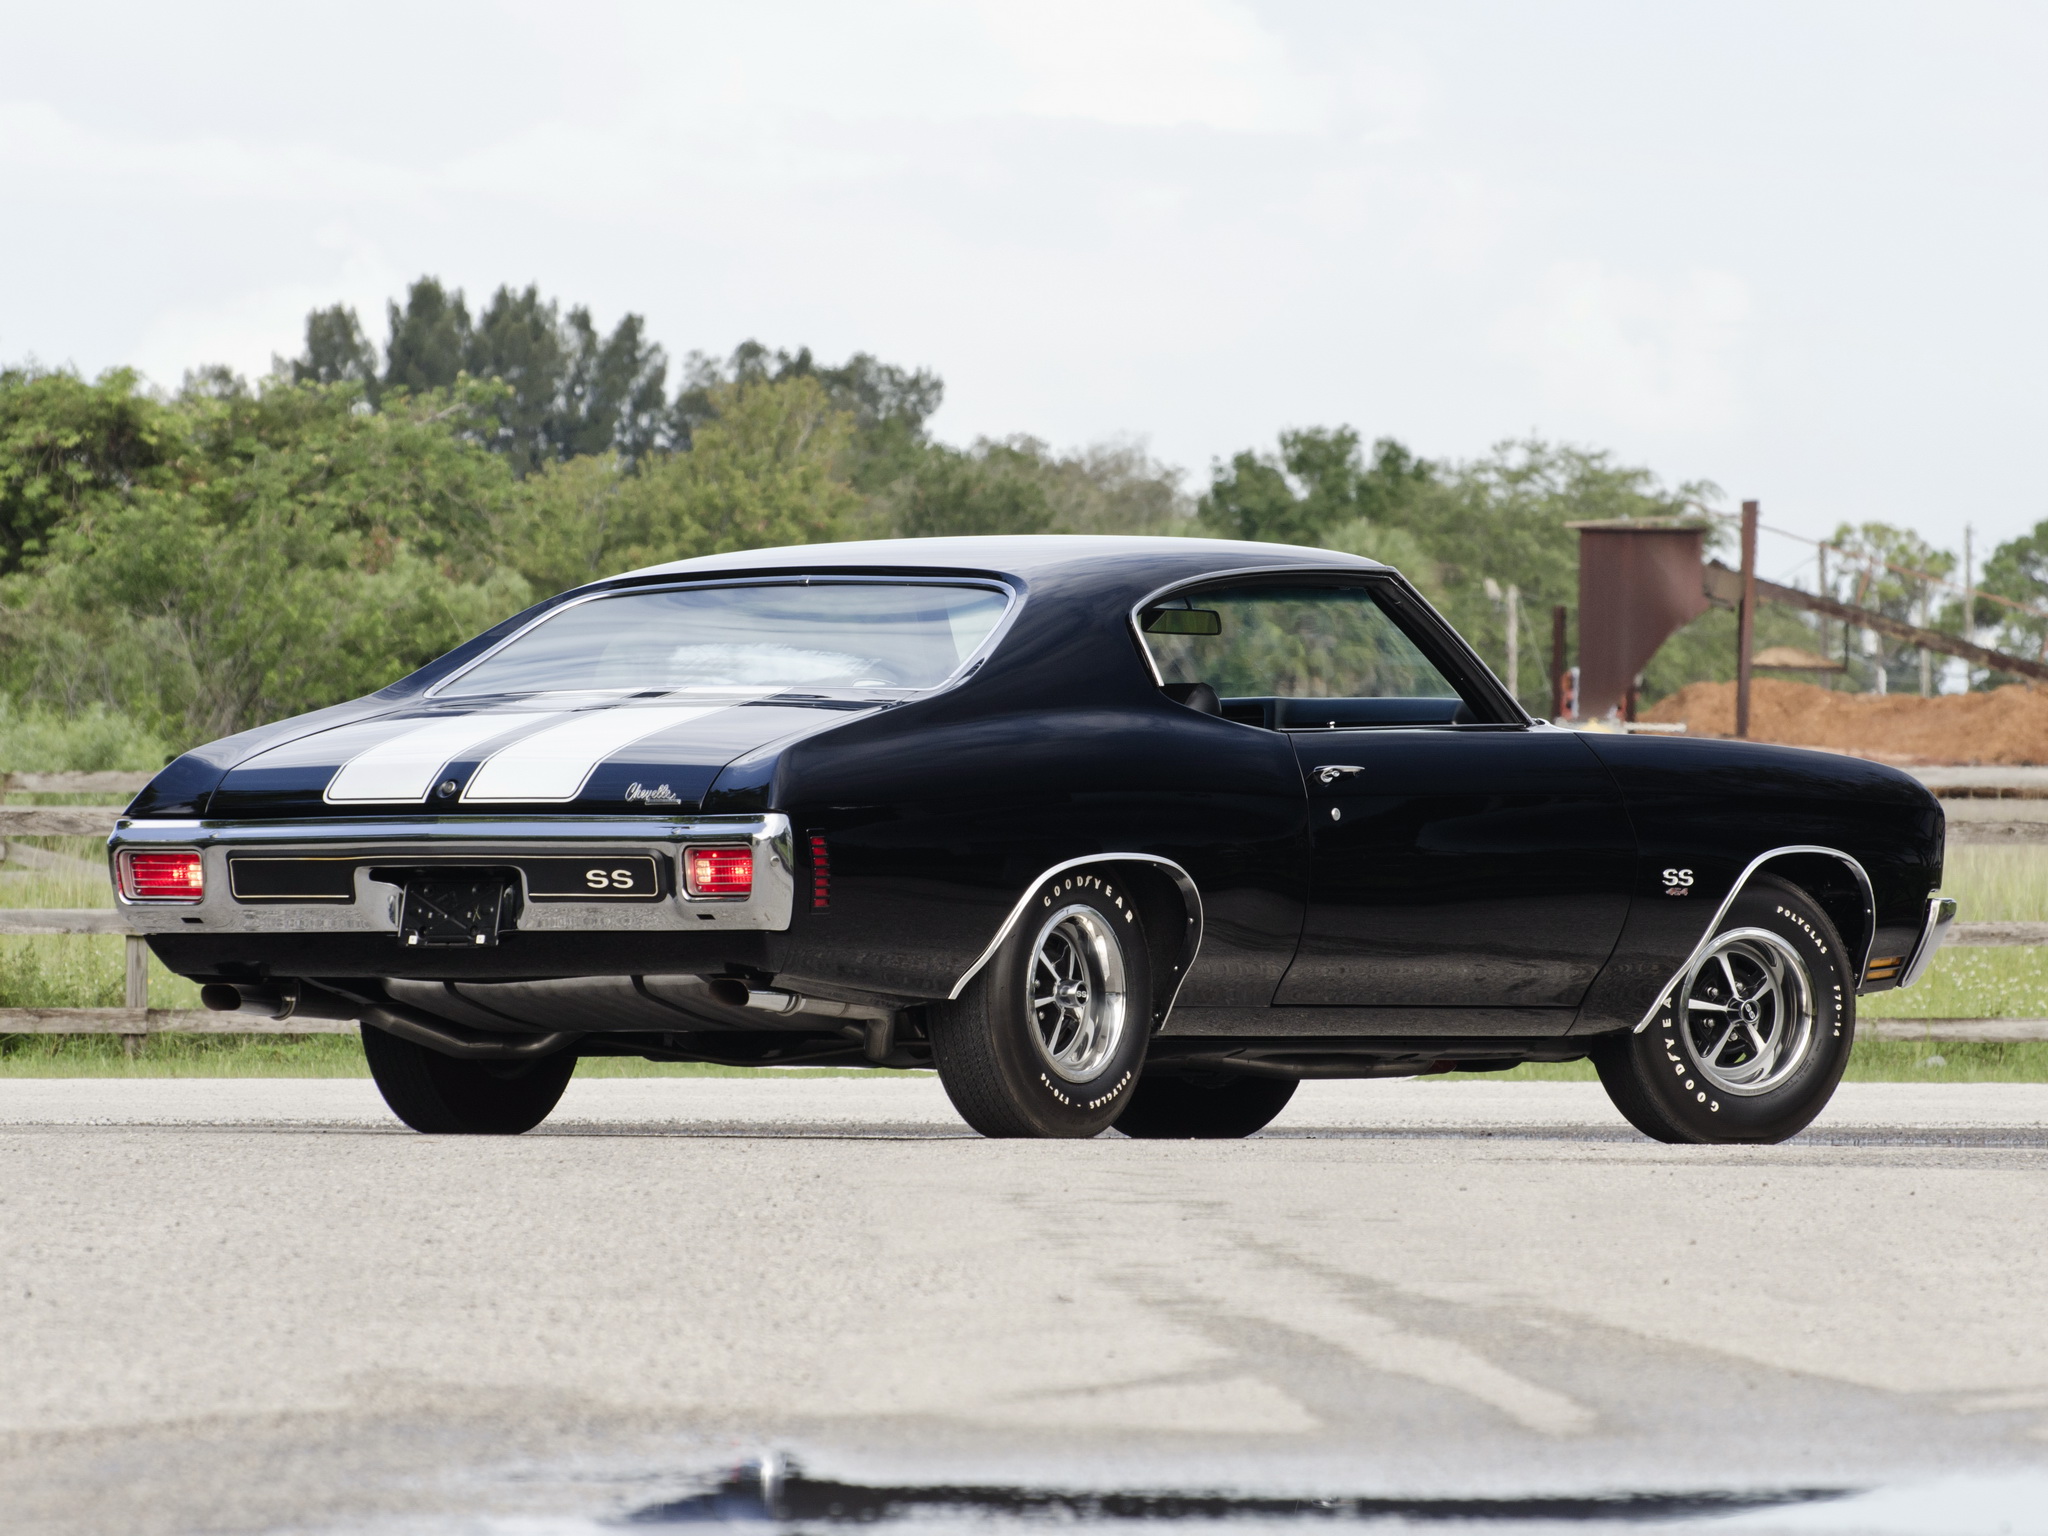 1970, Chevrolet, Chevelle, Ss, 454, Ls6, Hardtop, Coupe, Muscle, Classic, S s Wallpaper